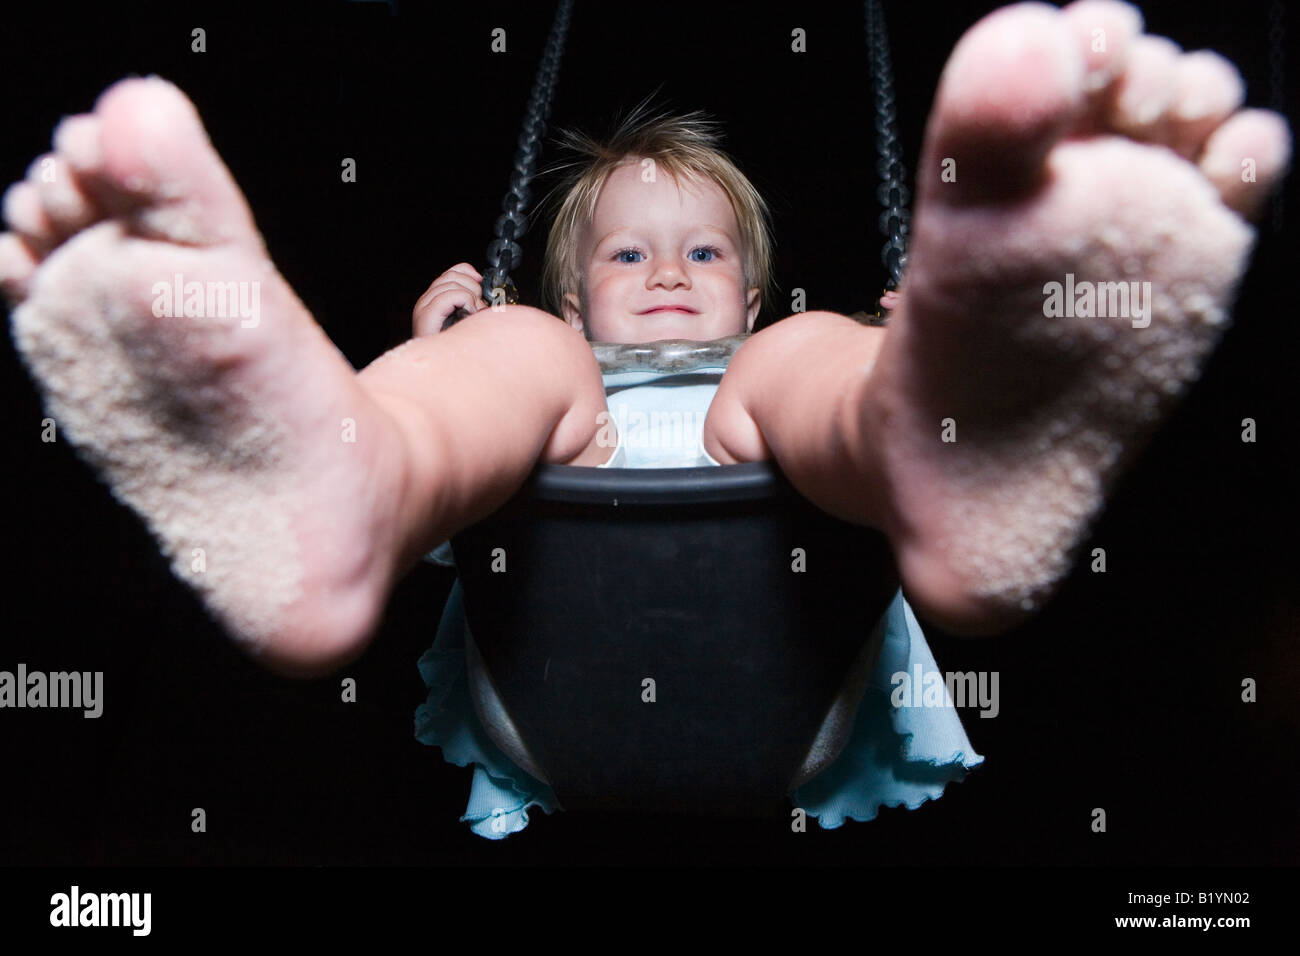 Barefooted girl on a swing feet first Stock Photo